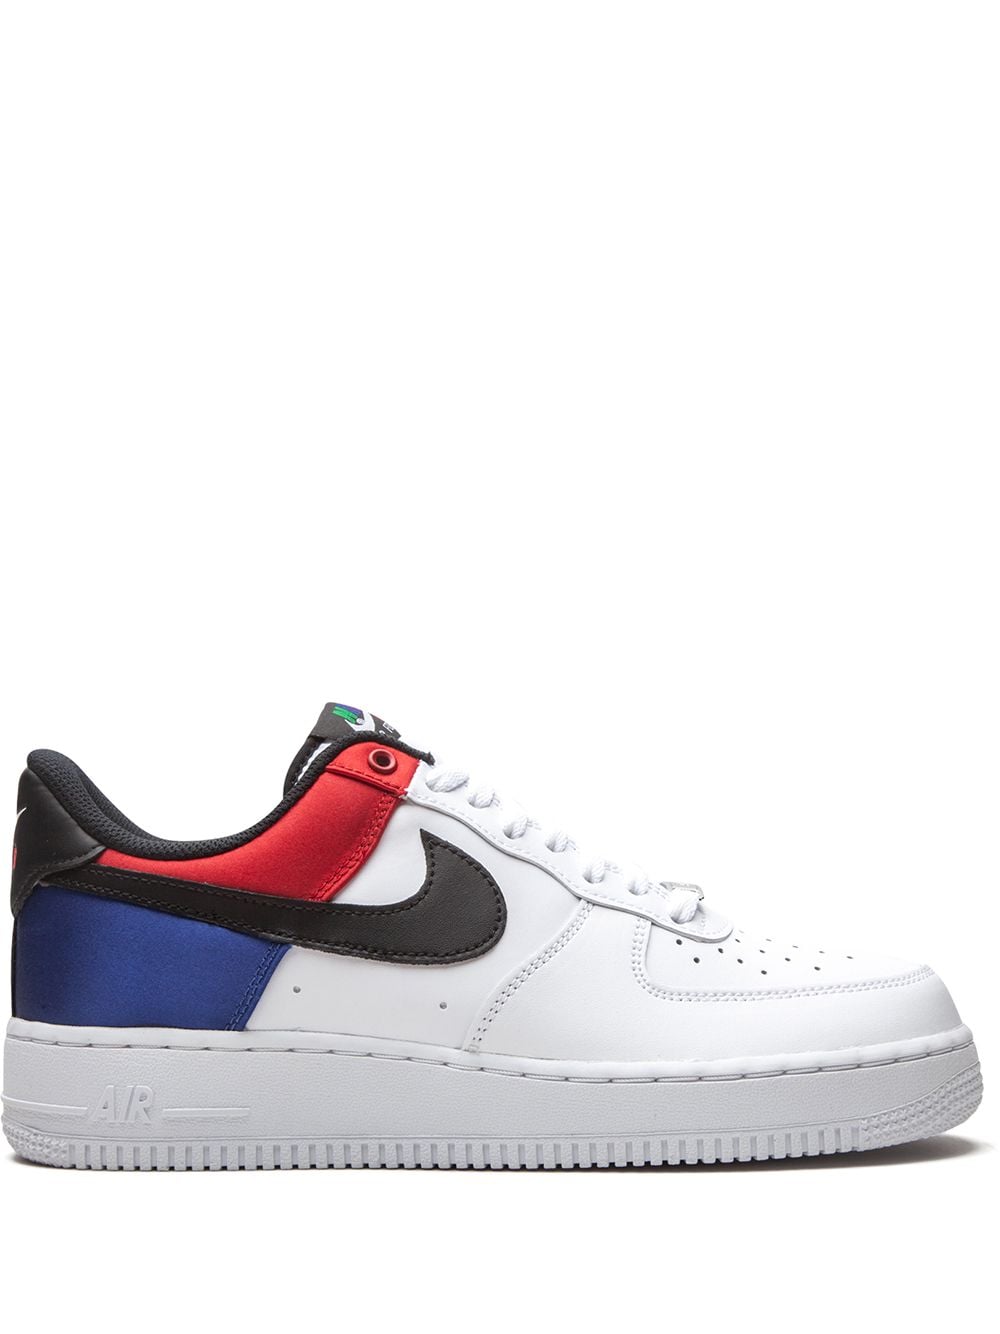 Nike Air Force 1 '07 LV8 1 sneakers - Wit